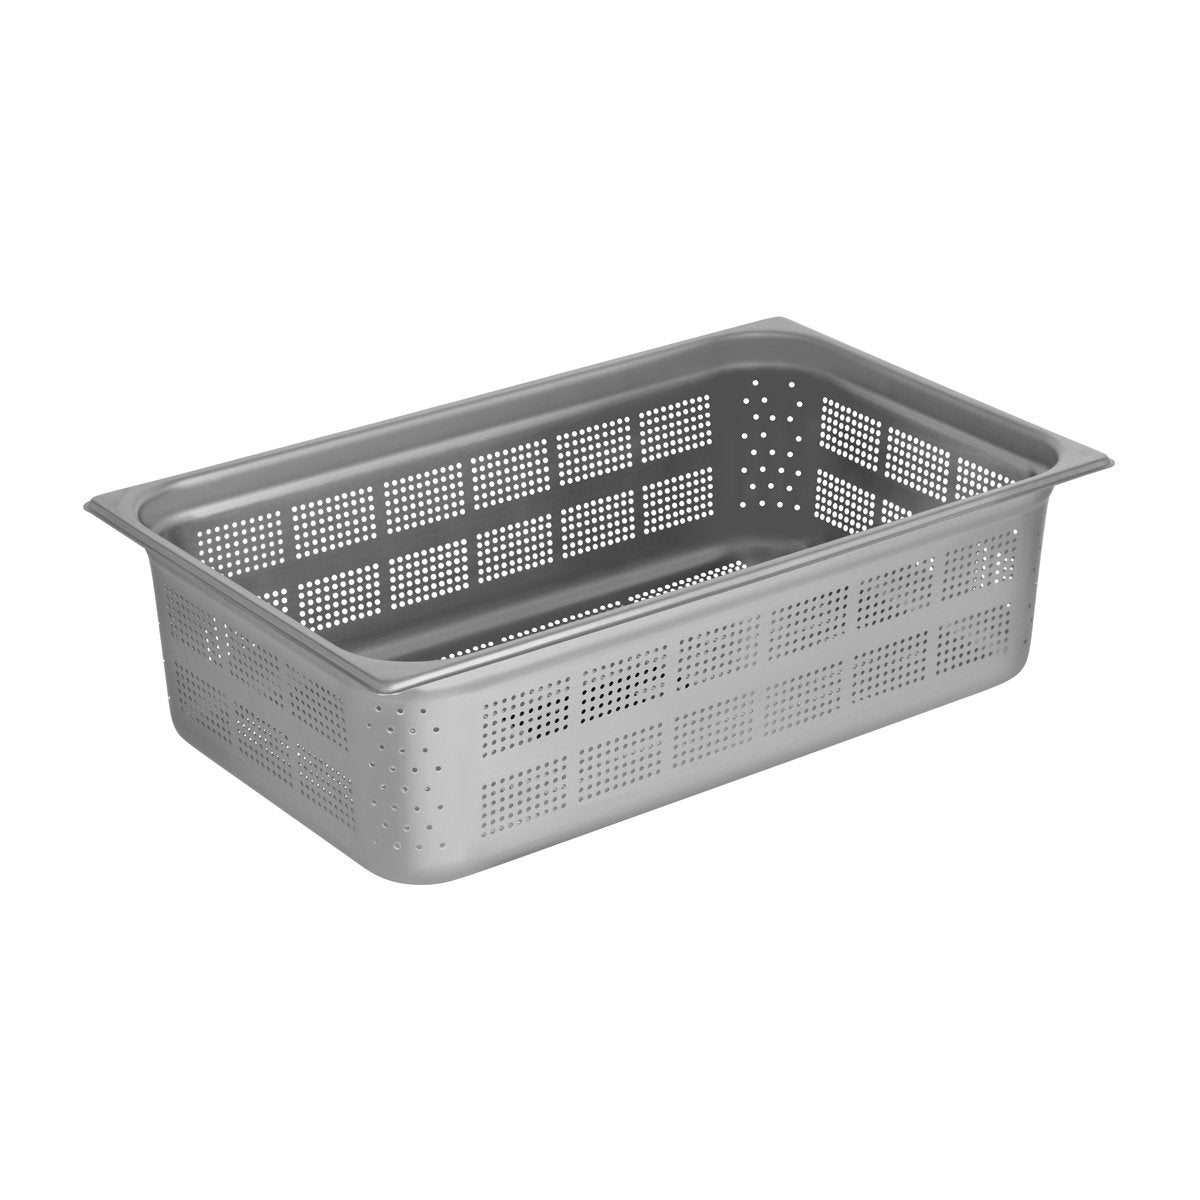 GNP-11150 Chef Inox Gastronorm Pan Perforated 1/1 Size 150mm Tomkin Australia Hospitality Supplies